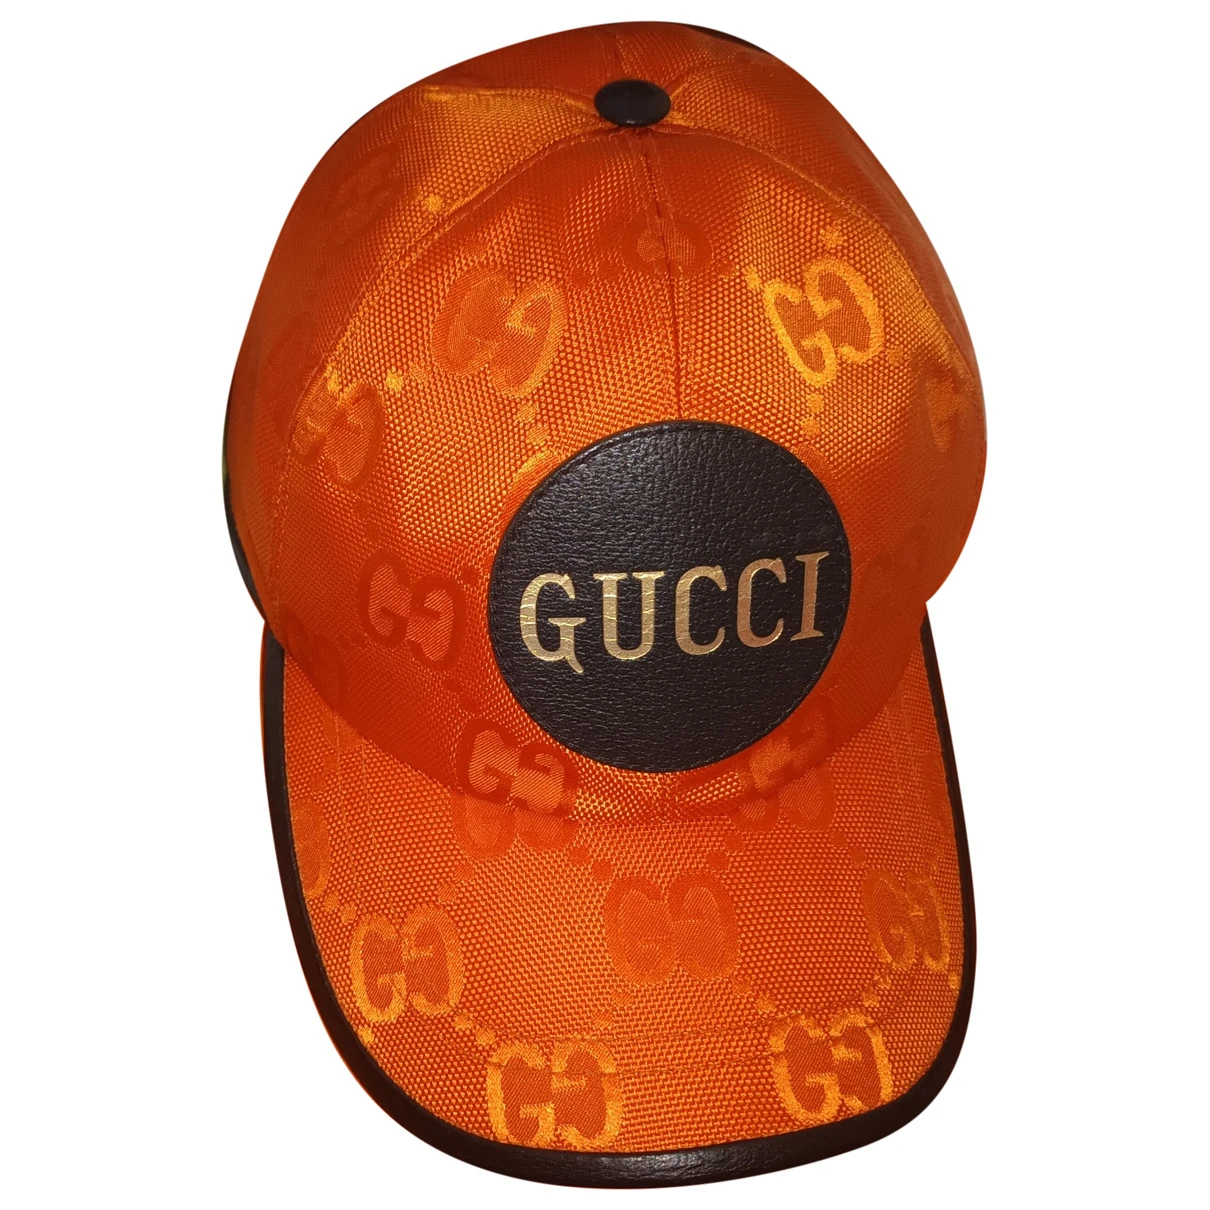 Pre-owned Gucci Hat In Orange